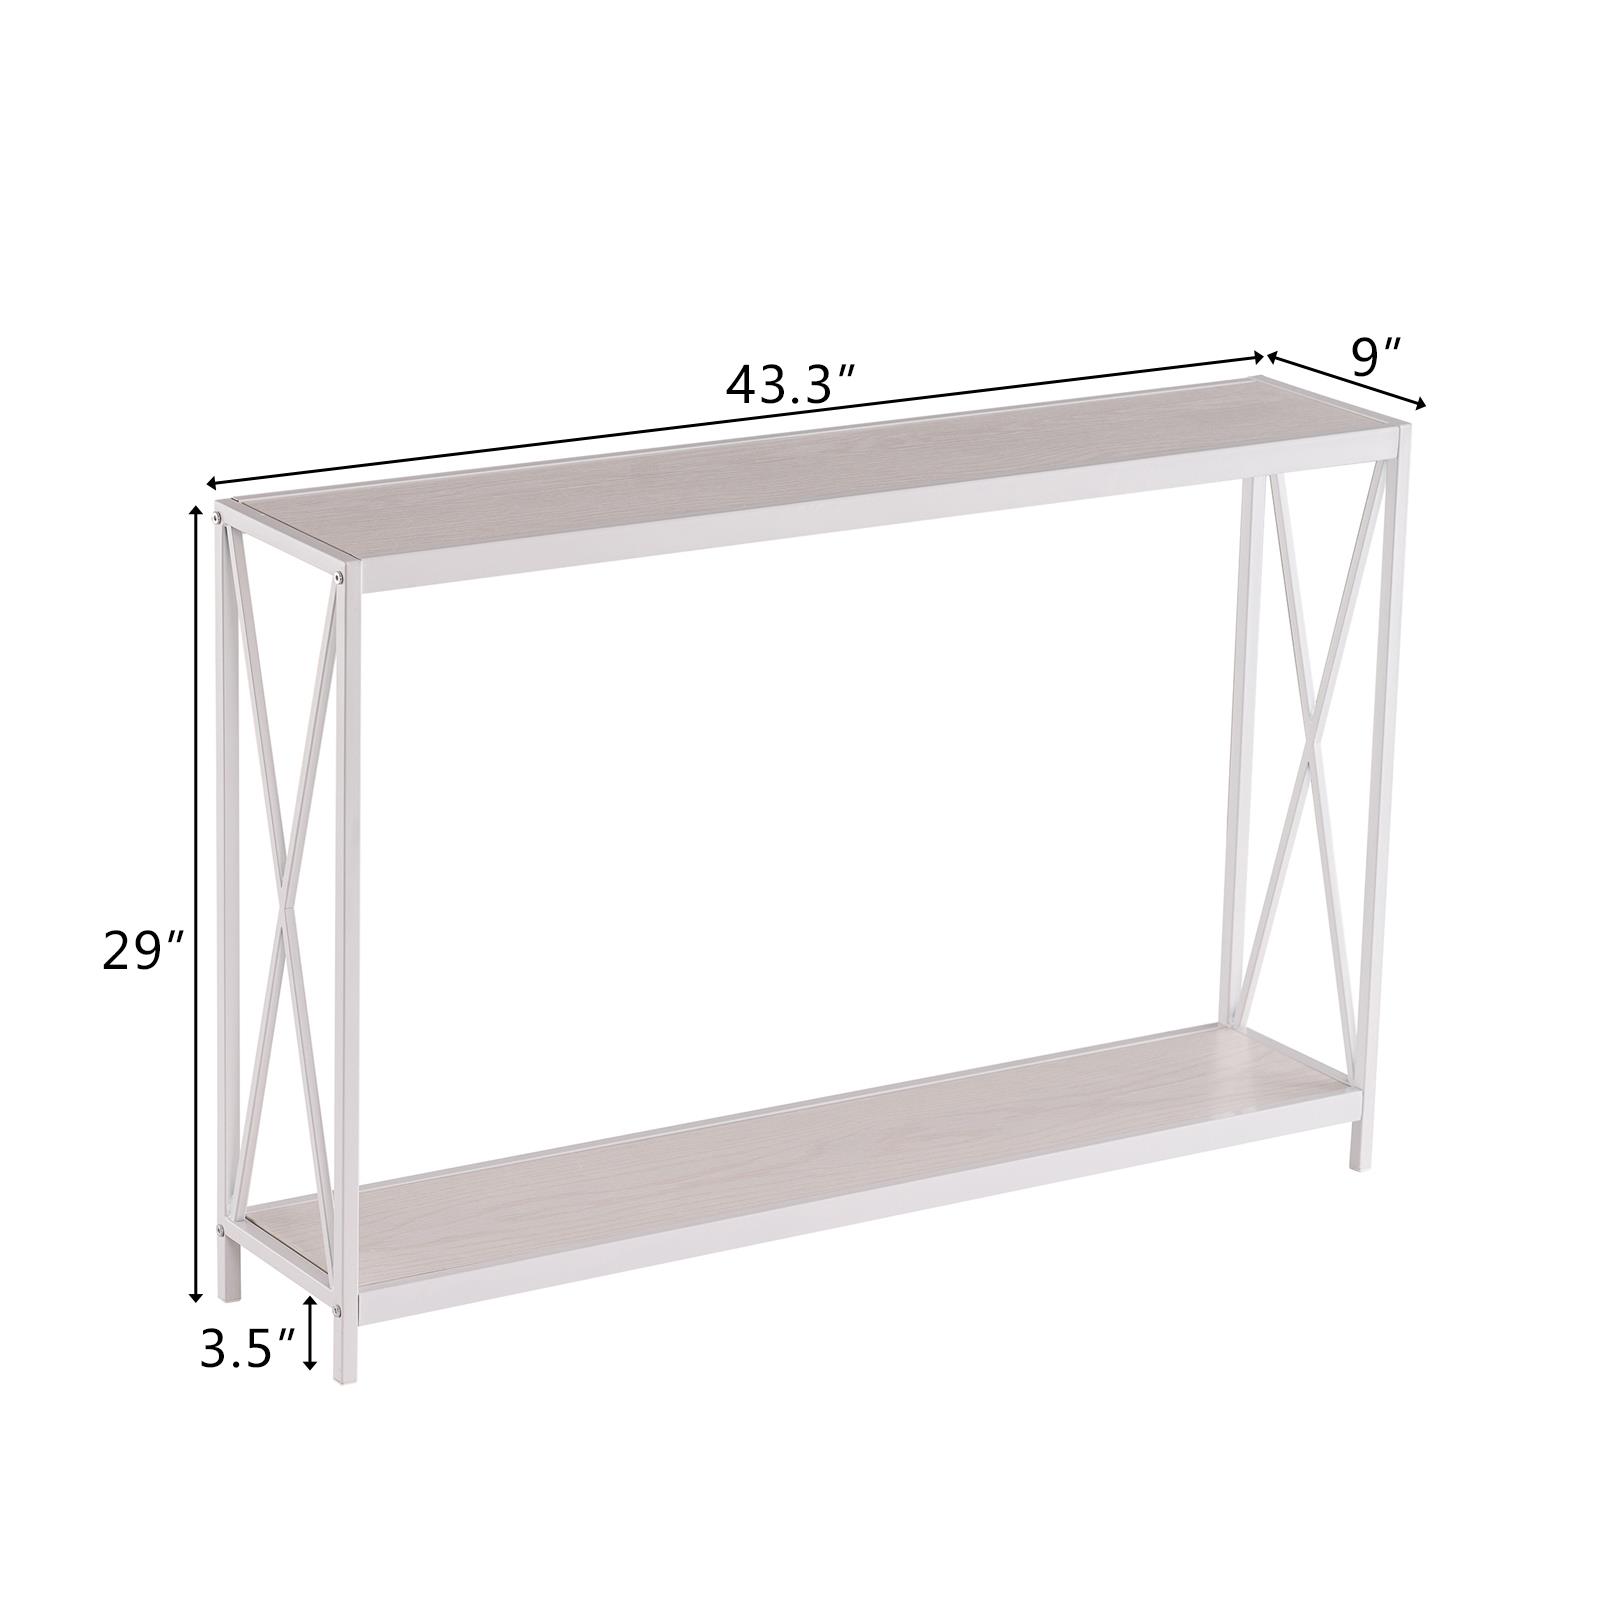 Zimtown Console Table, Sofa Table, Metal Frame, Easy Assembly, for ...